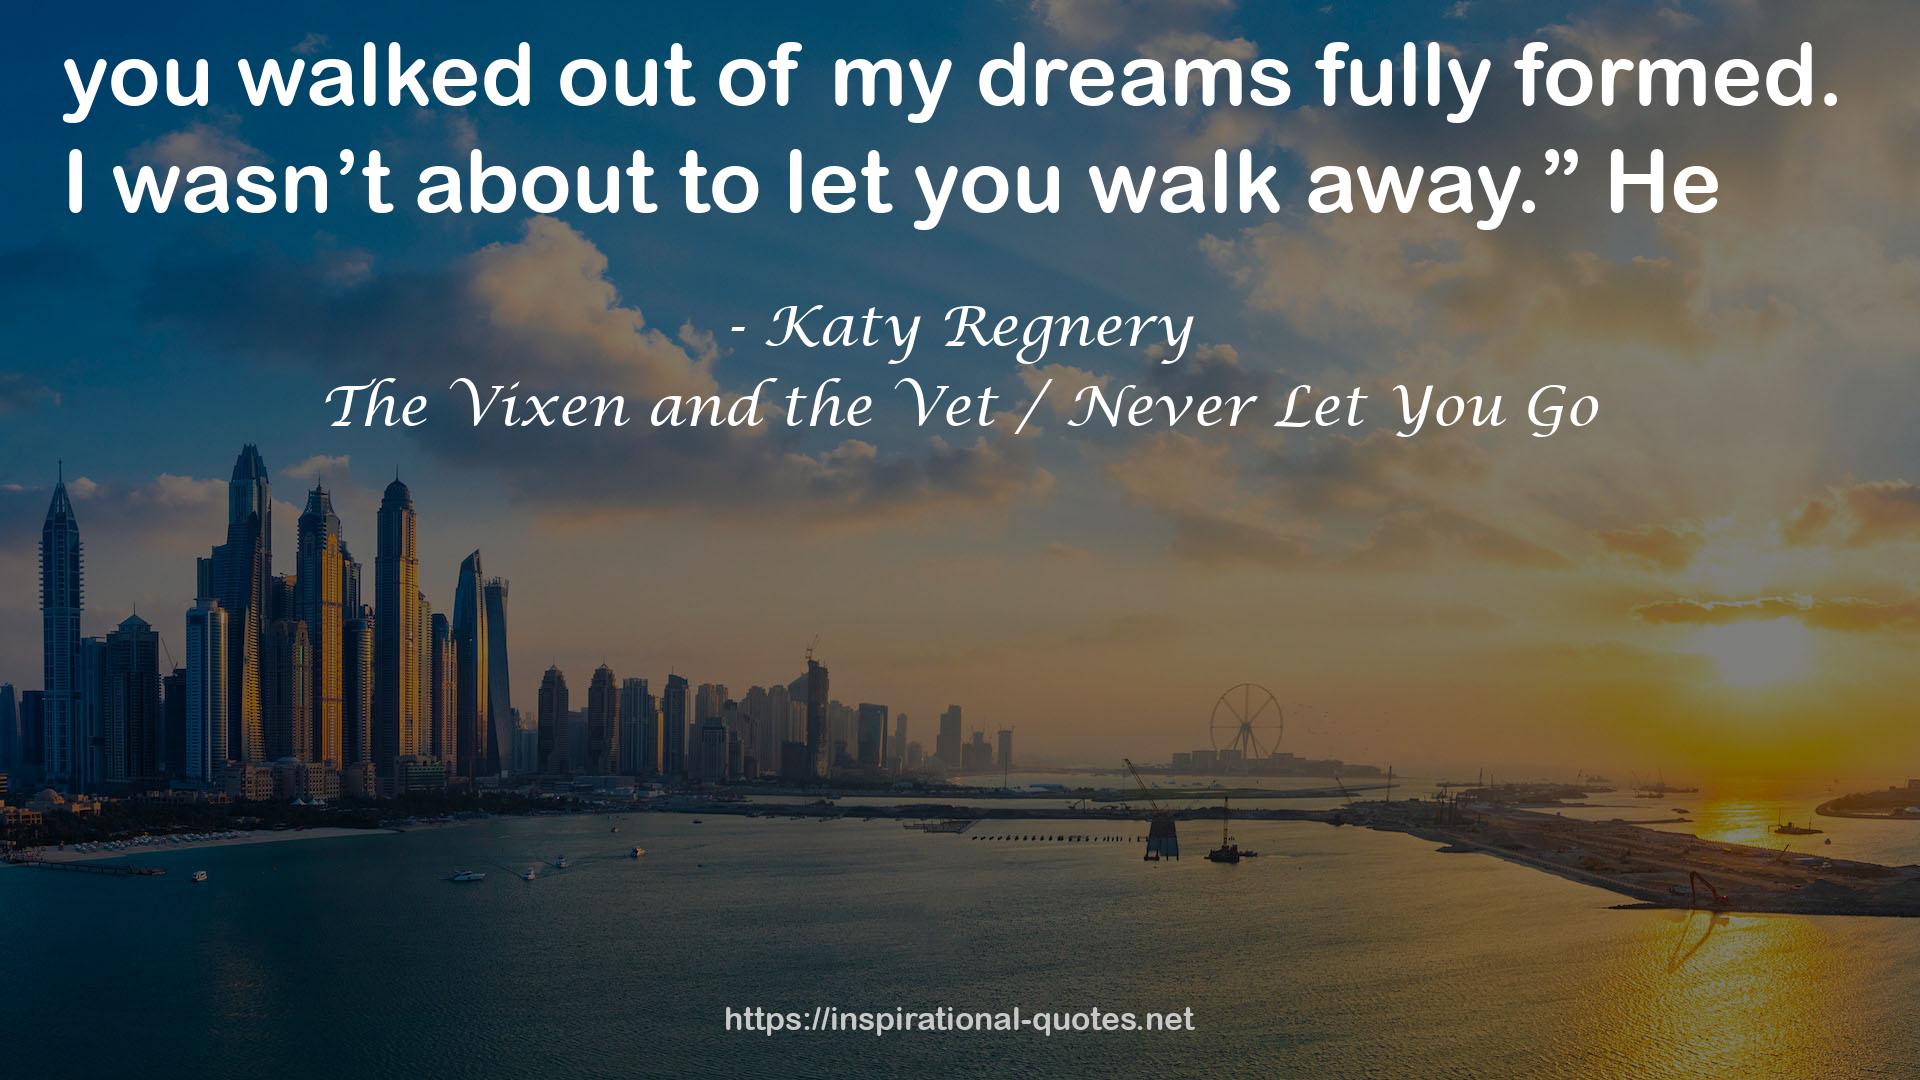 The Vixen and the Vet / Never Let You Go QUOTES